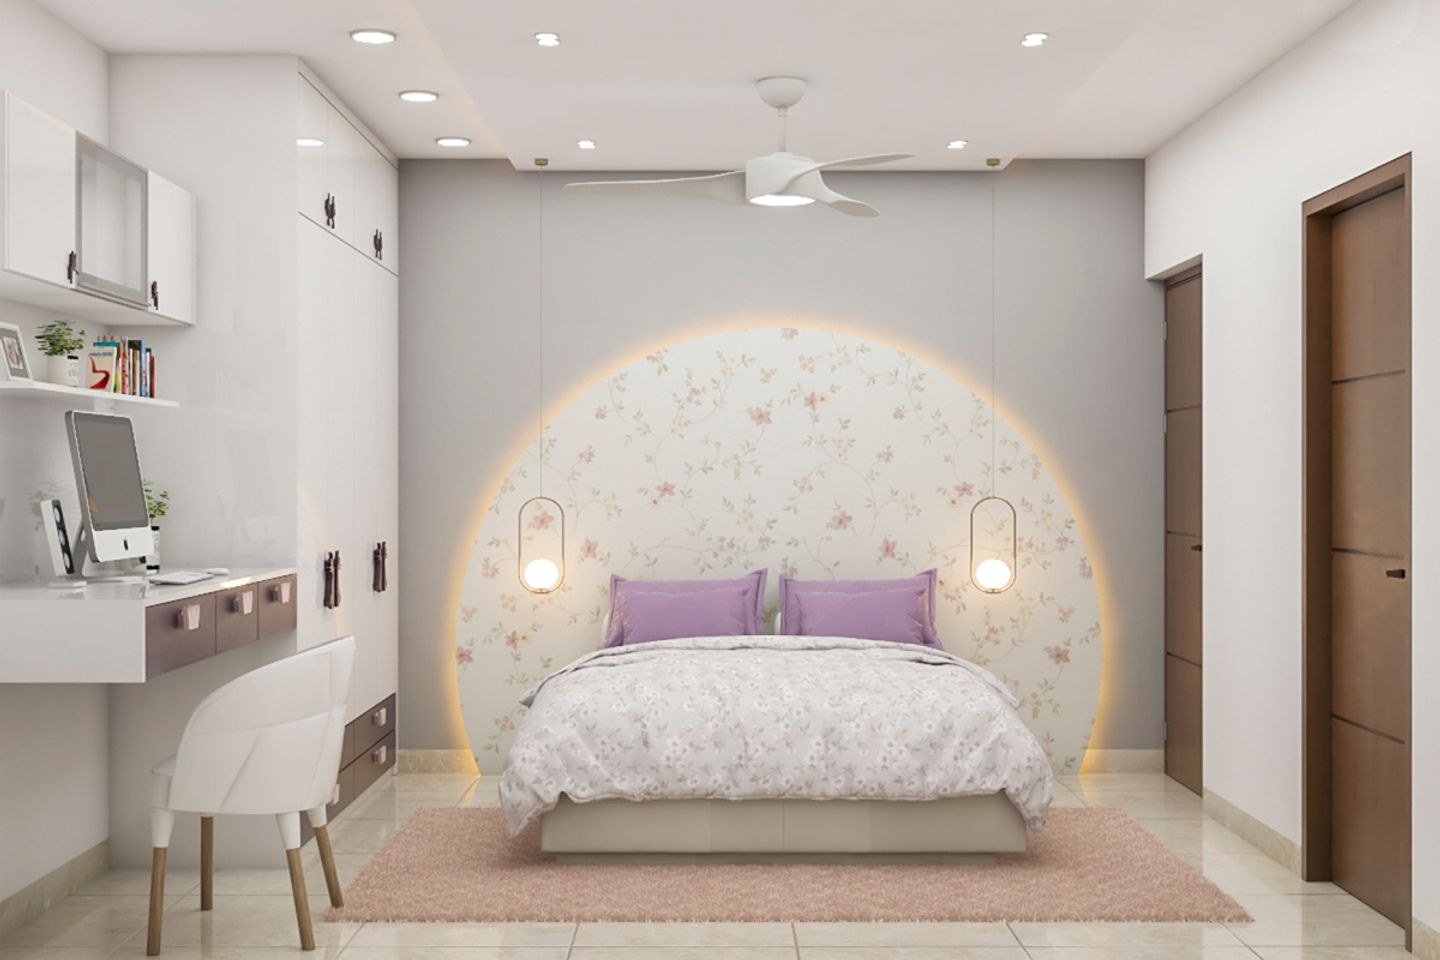 Kid's Bedroom Design With Arched Wall - Livspace